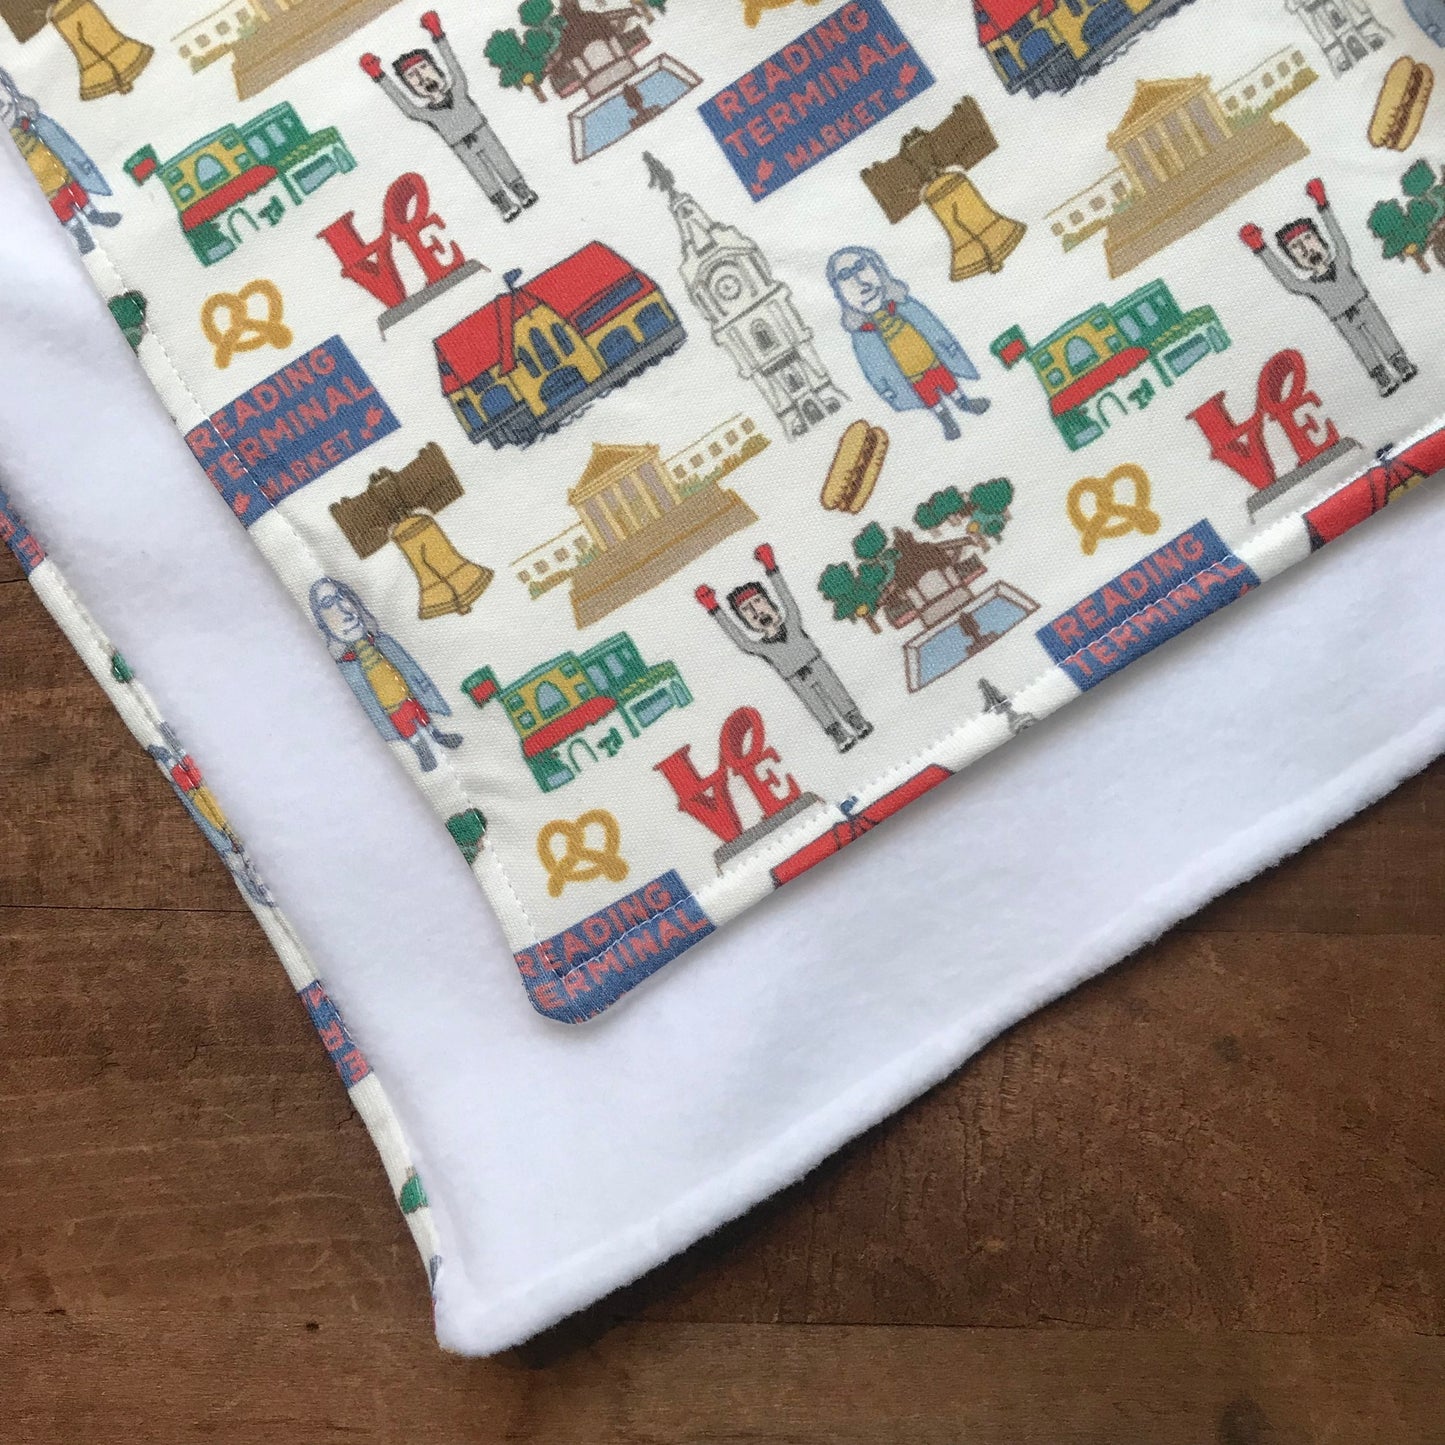 Fabric with a colorful pattern of iconic Philadelphia symbols and landmarks depicted on an organic cotton Ana Thorne Philly Baby Blanket displayed on a wooden surface.